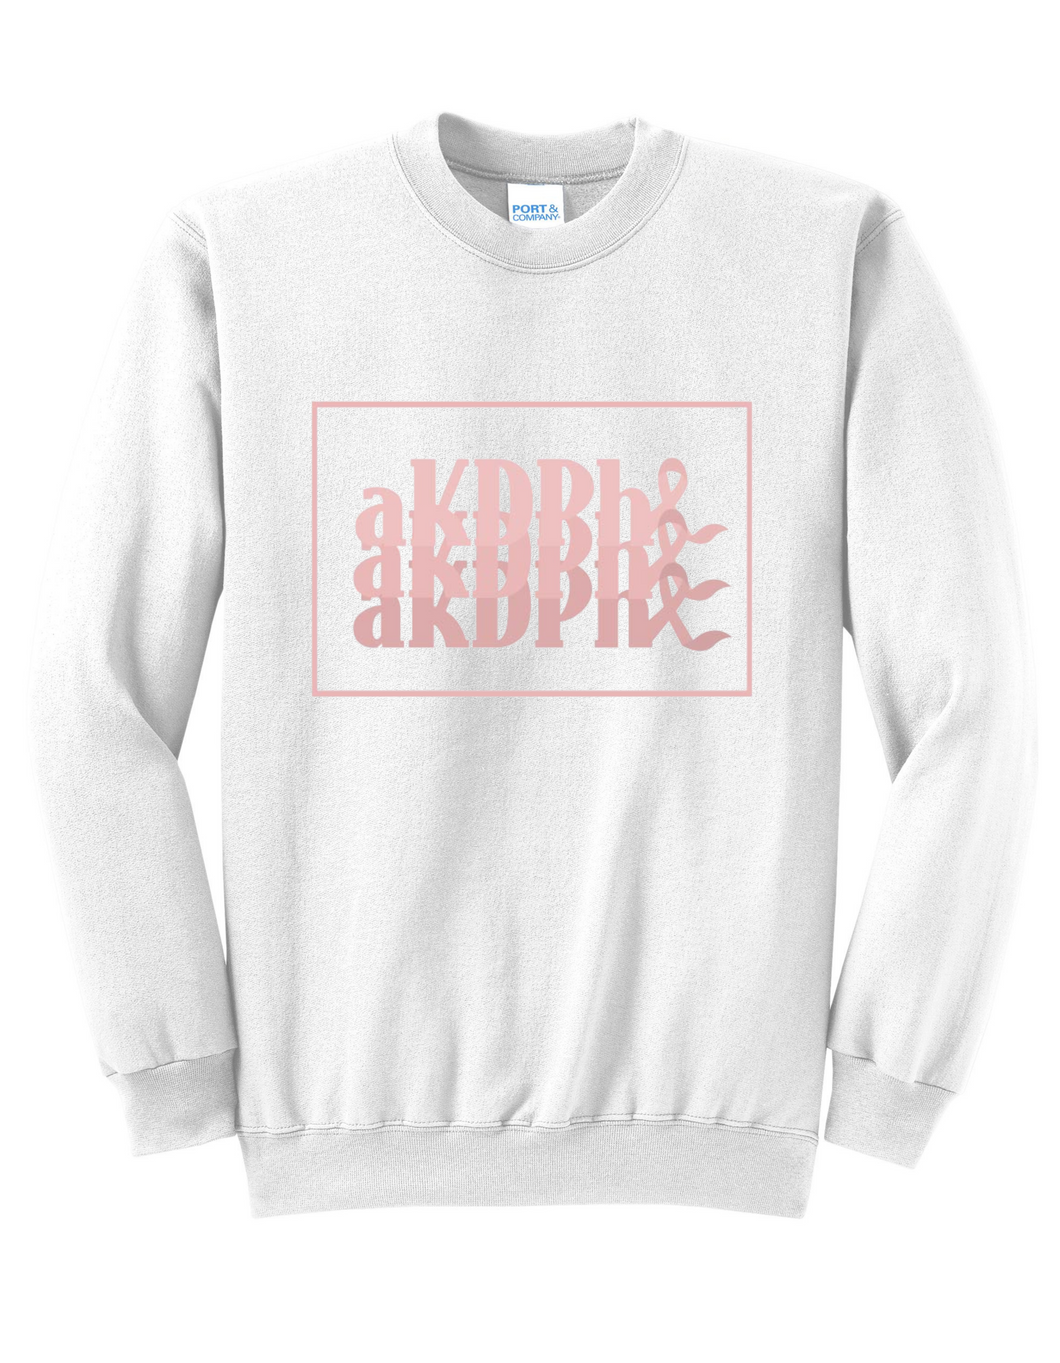 aKDPhi-iced out in pink - the crewneck*